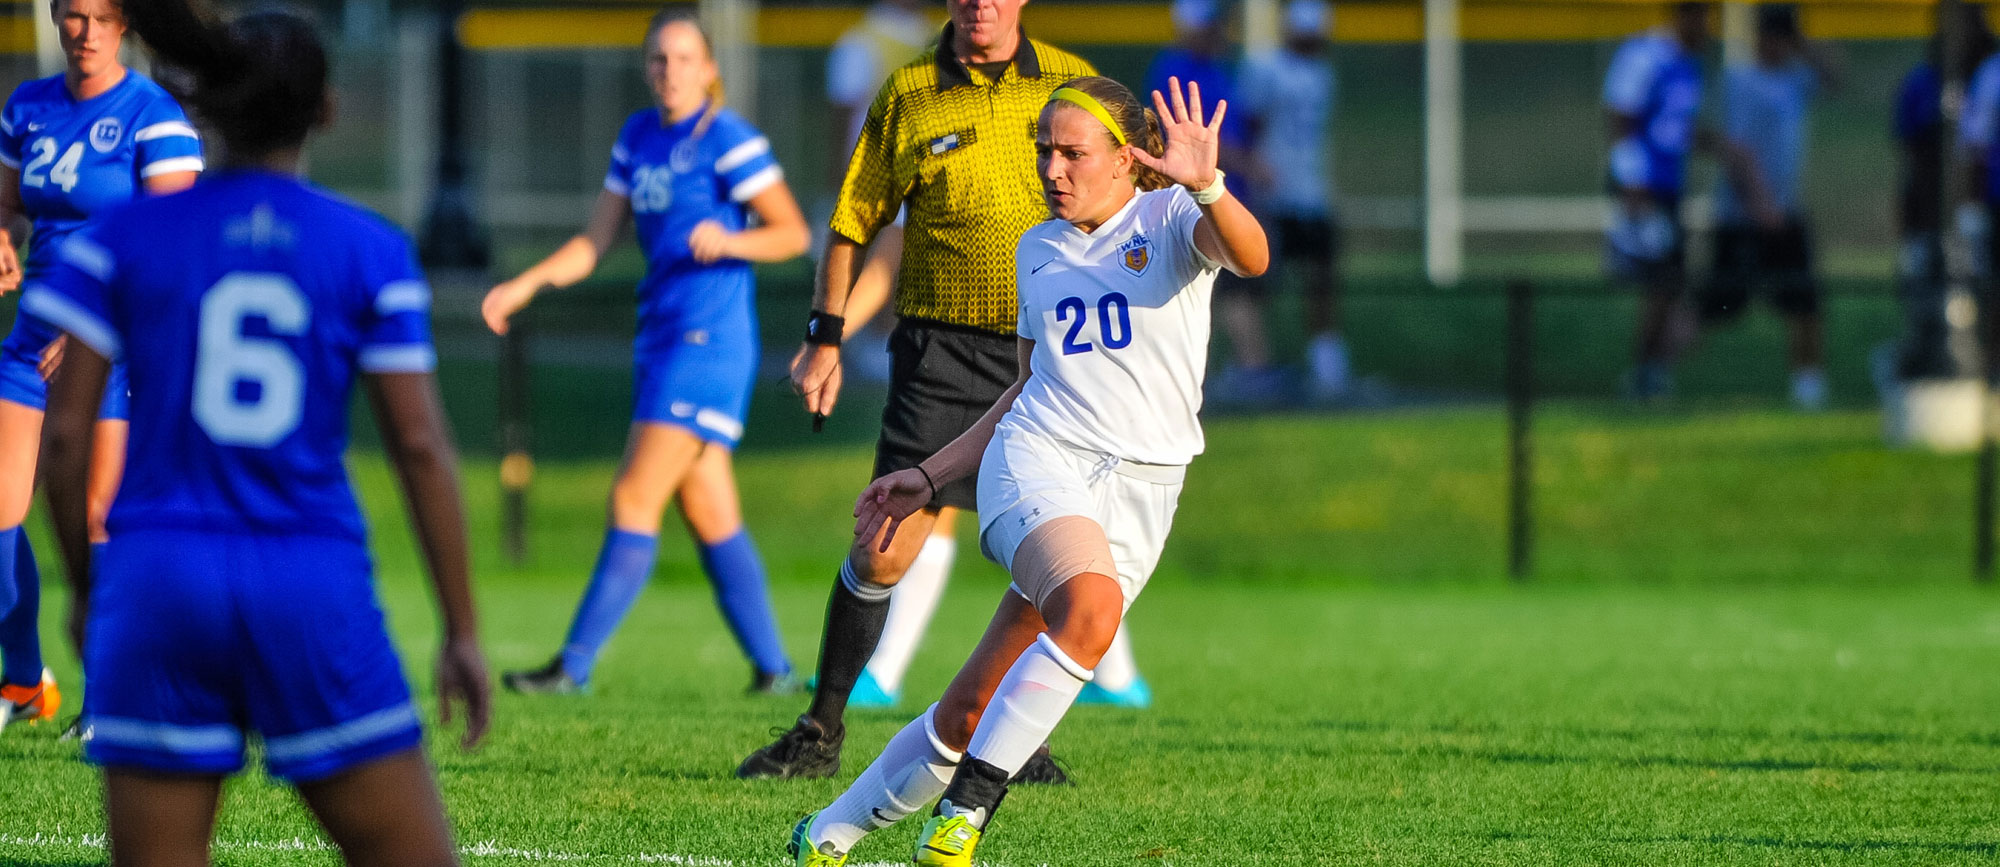 Western New England Clinches Berth in CCC Tournament with 2-2 Draw at Salve Regina